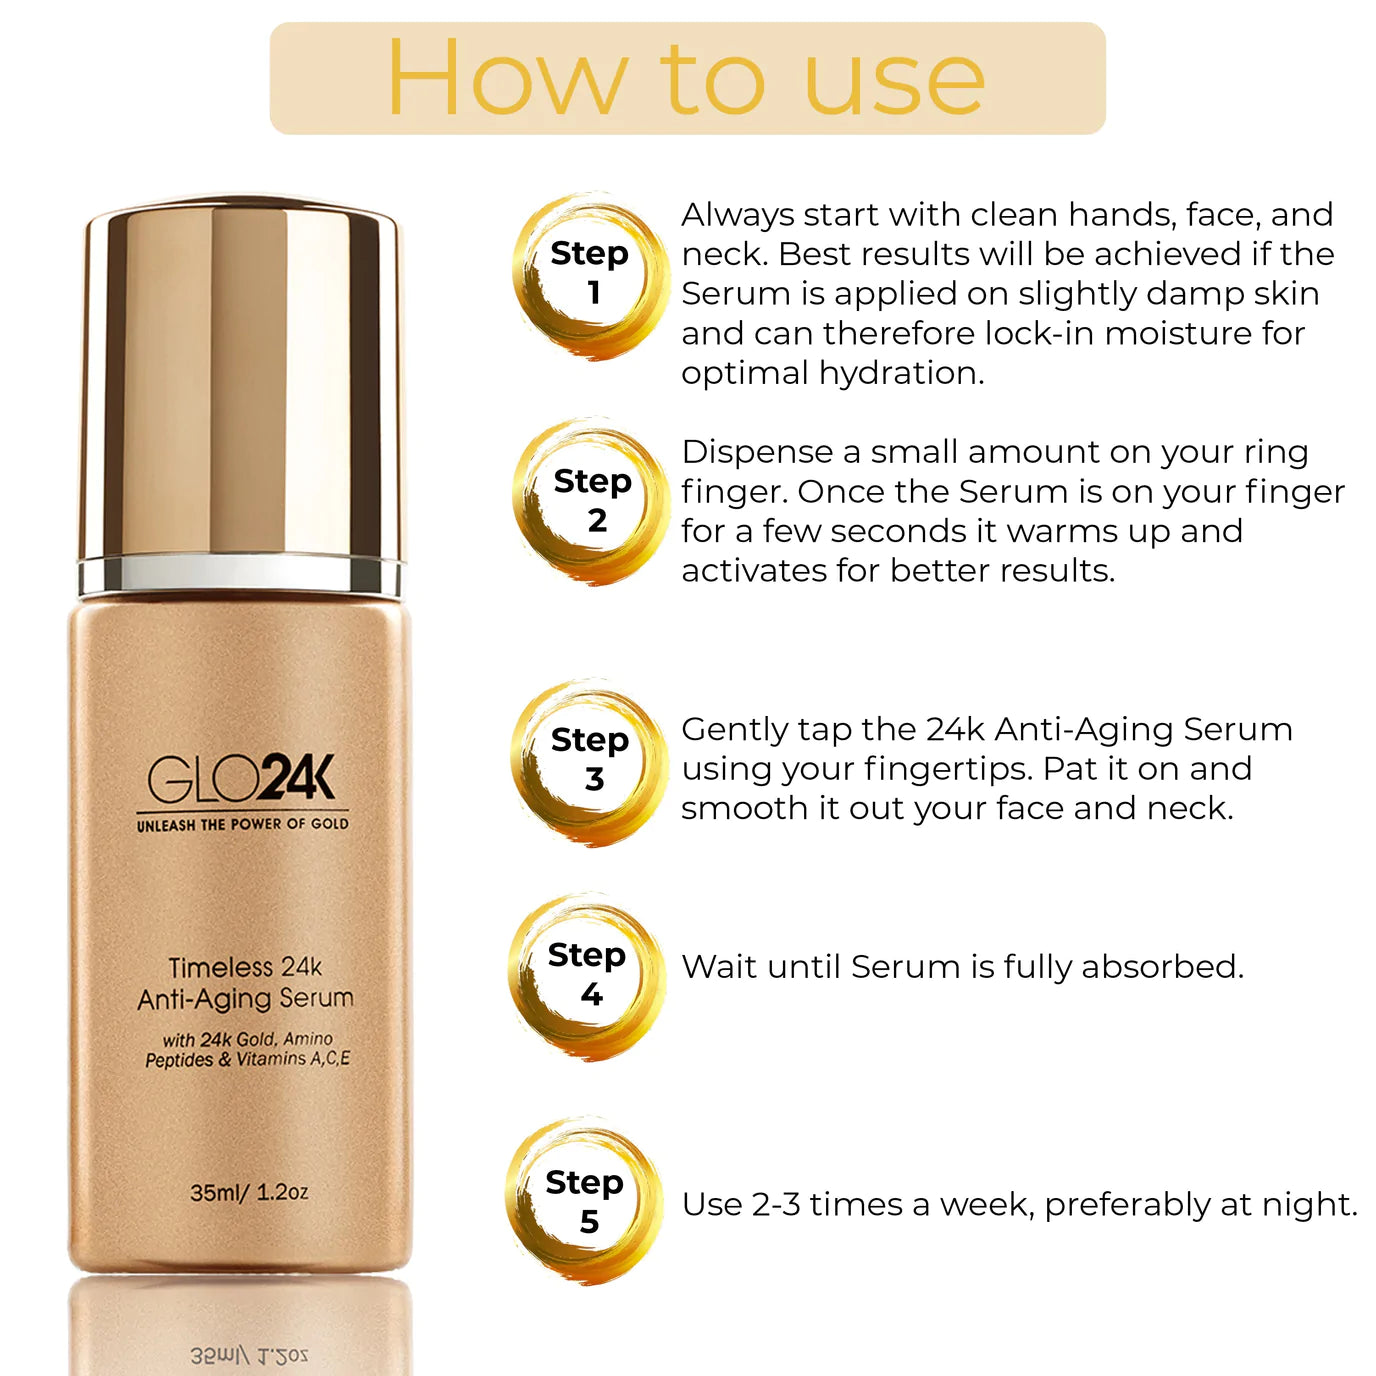 How to use GLO24K Timeless 24k Anti-Ageing Serum